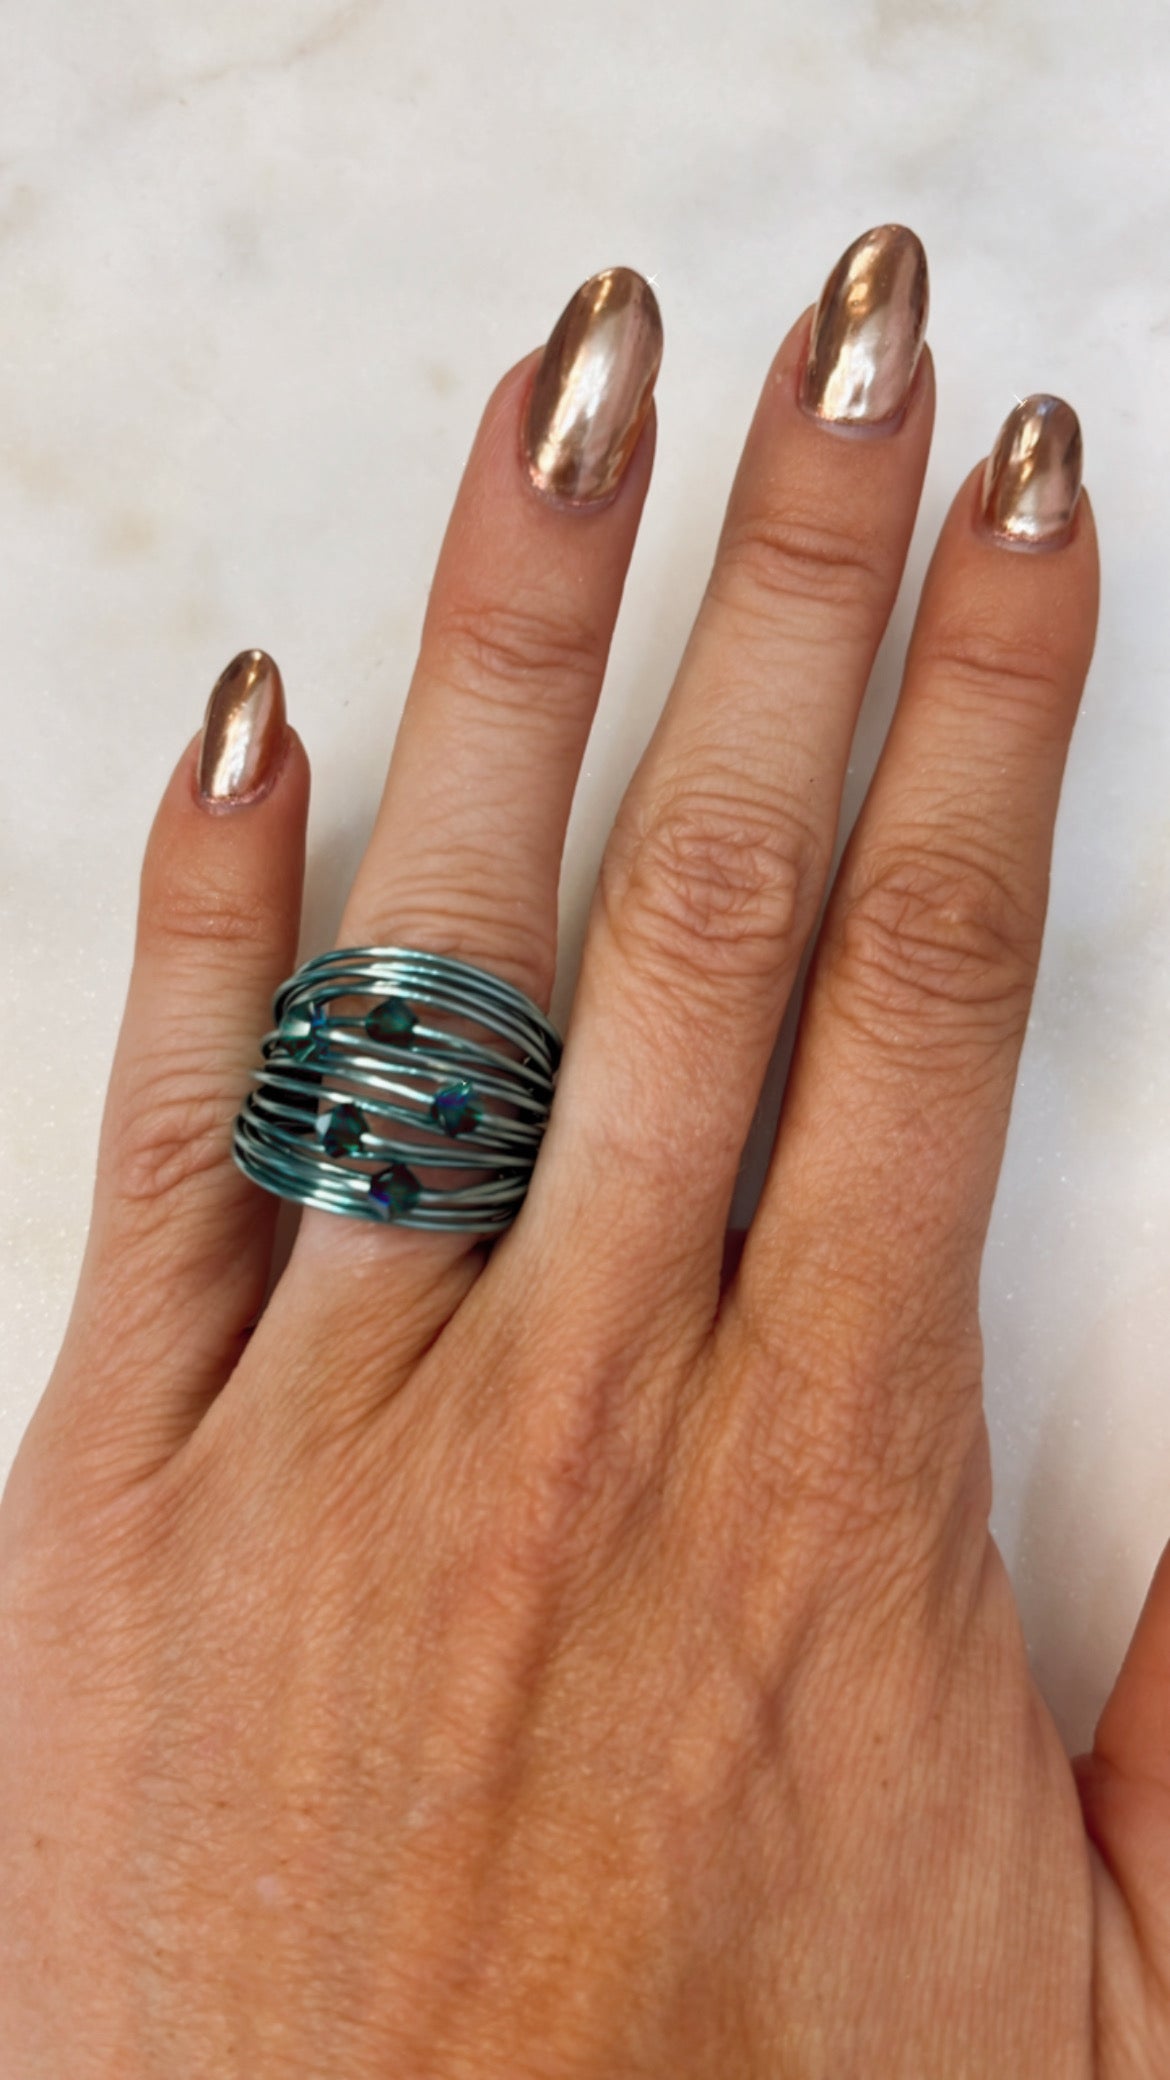 Marcia Light Blue Wire Wrap Ring with Forest Green Swarovski Crystals